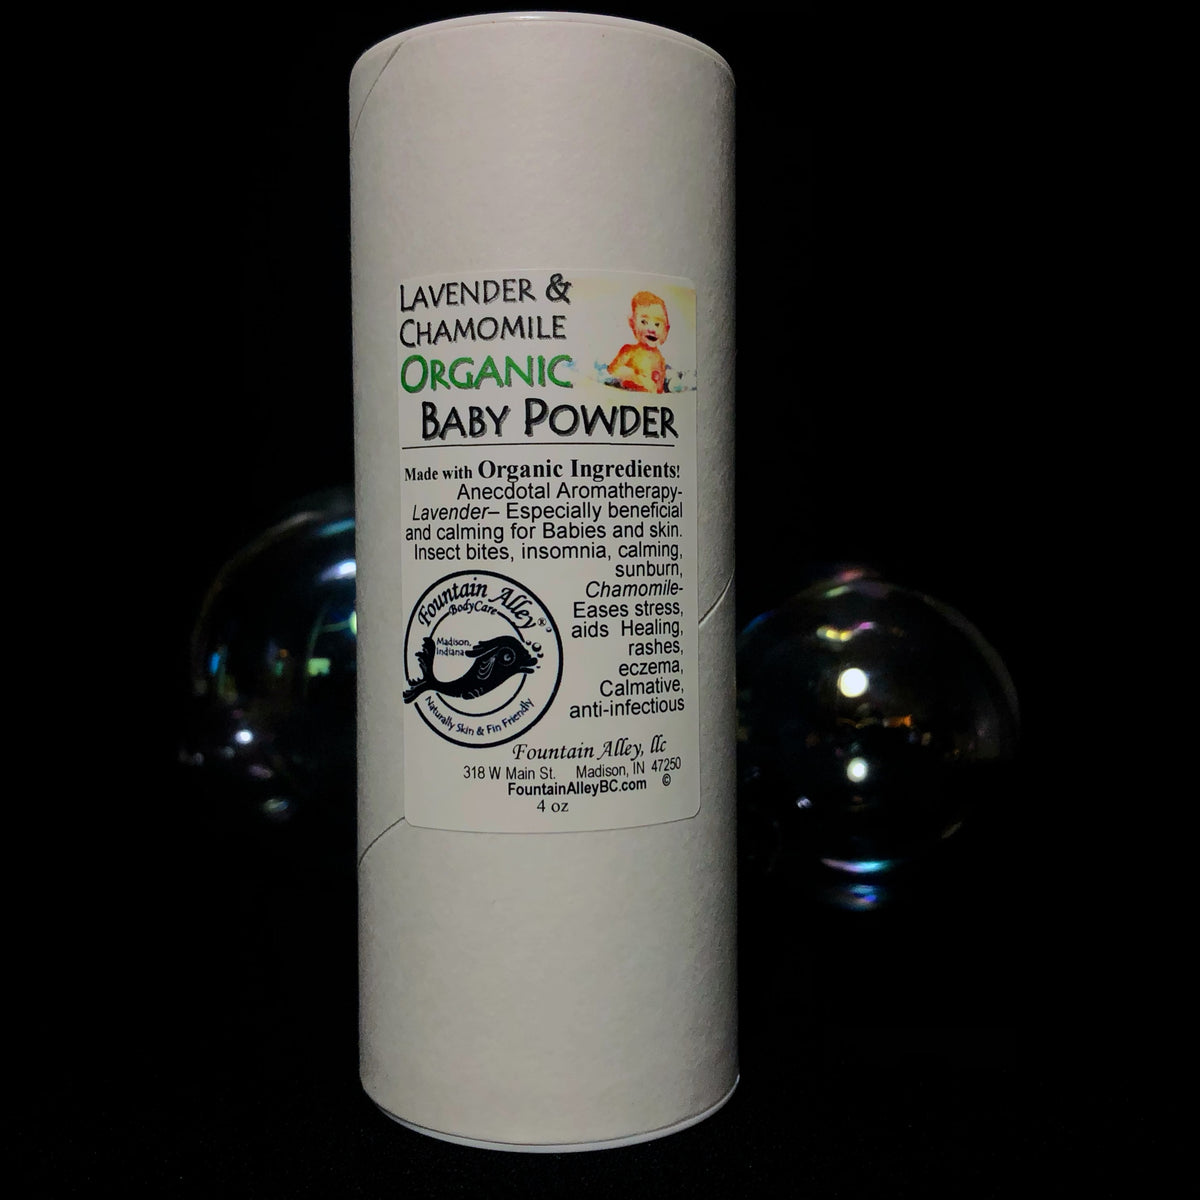 Onisavings Baby Powder Fragrance Oil - Gentle Powder Oil Perfect for  Sensitive Skin - Great Exotic Smell and Long-lasting - Naturally Absorbent  Non-Toxic Baby Powder Oil